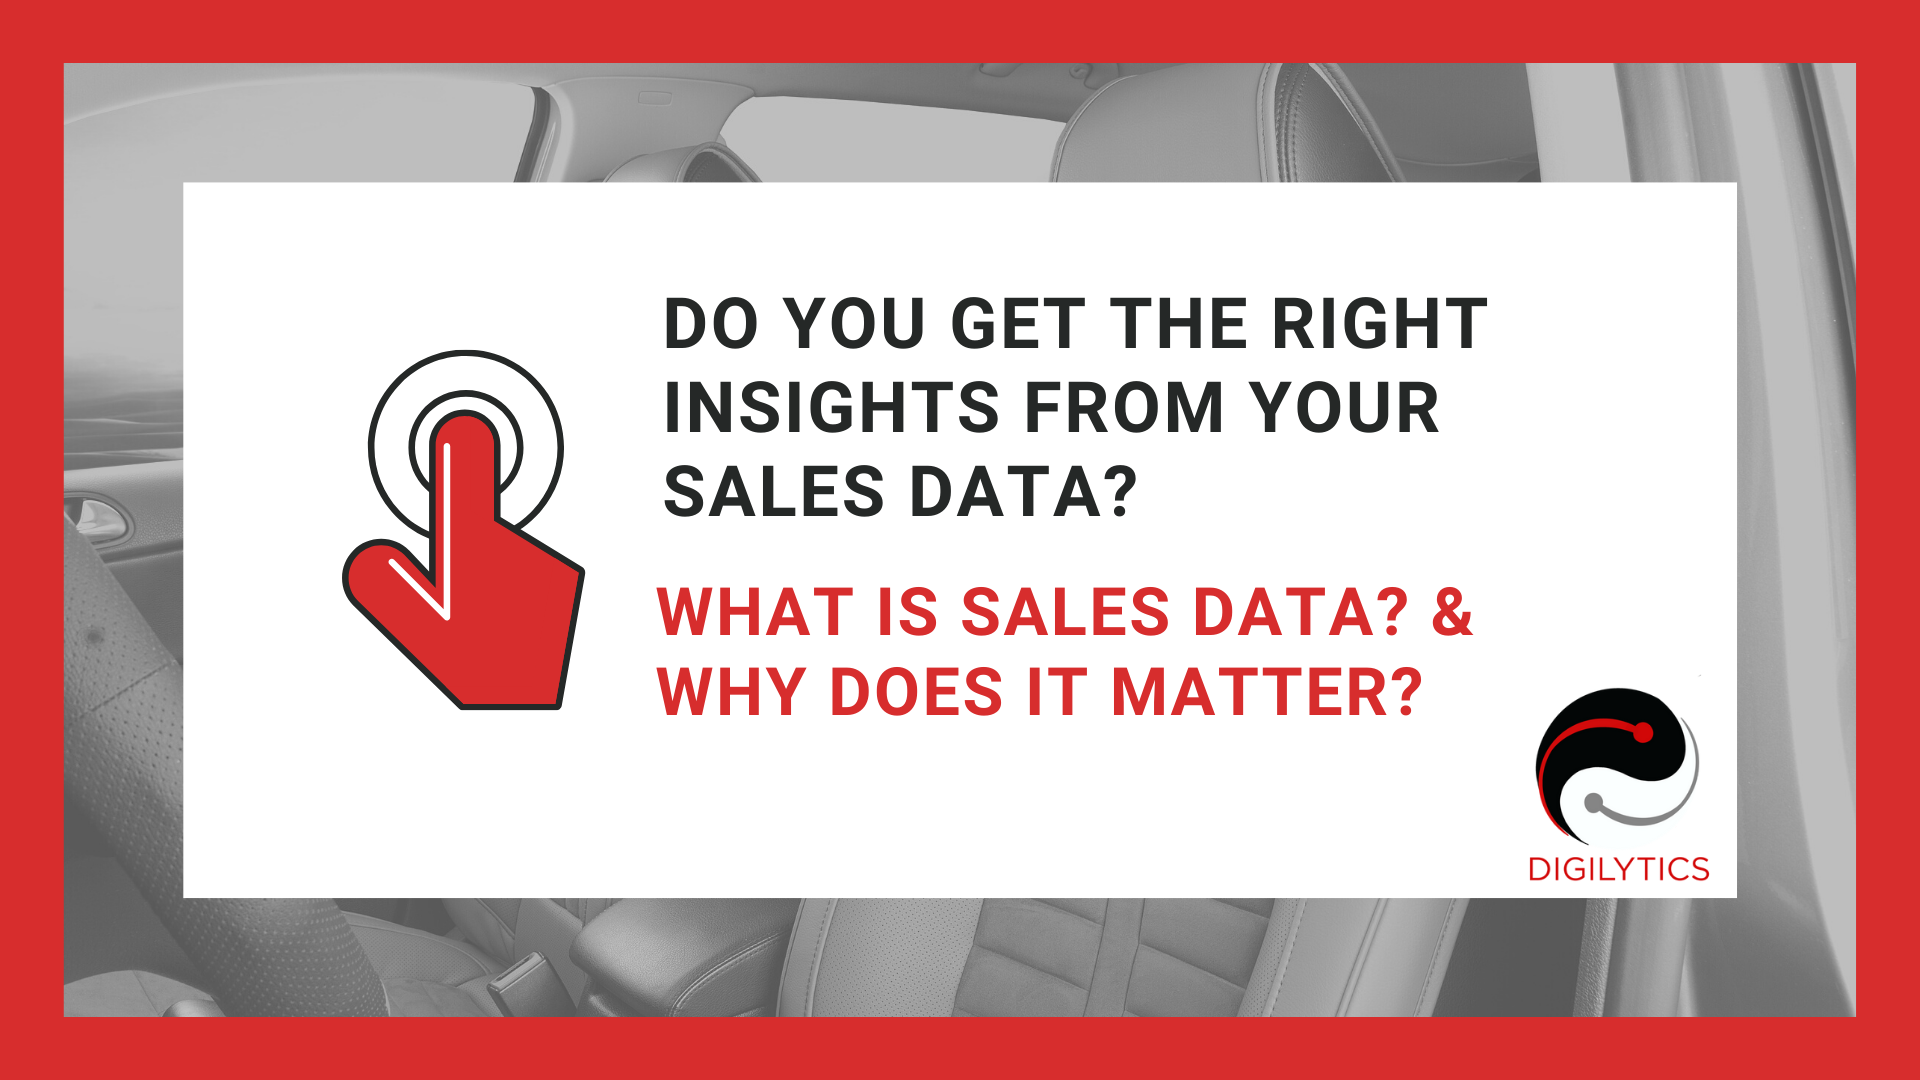 Do you get the right insights from your sales data in auto aftermarket?